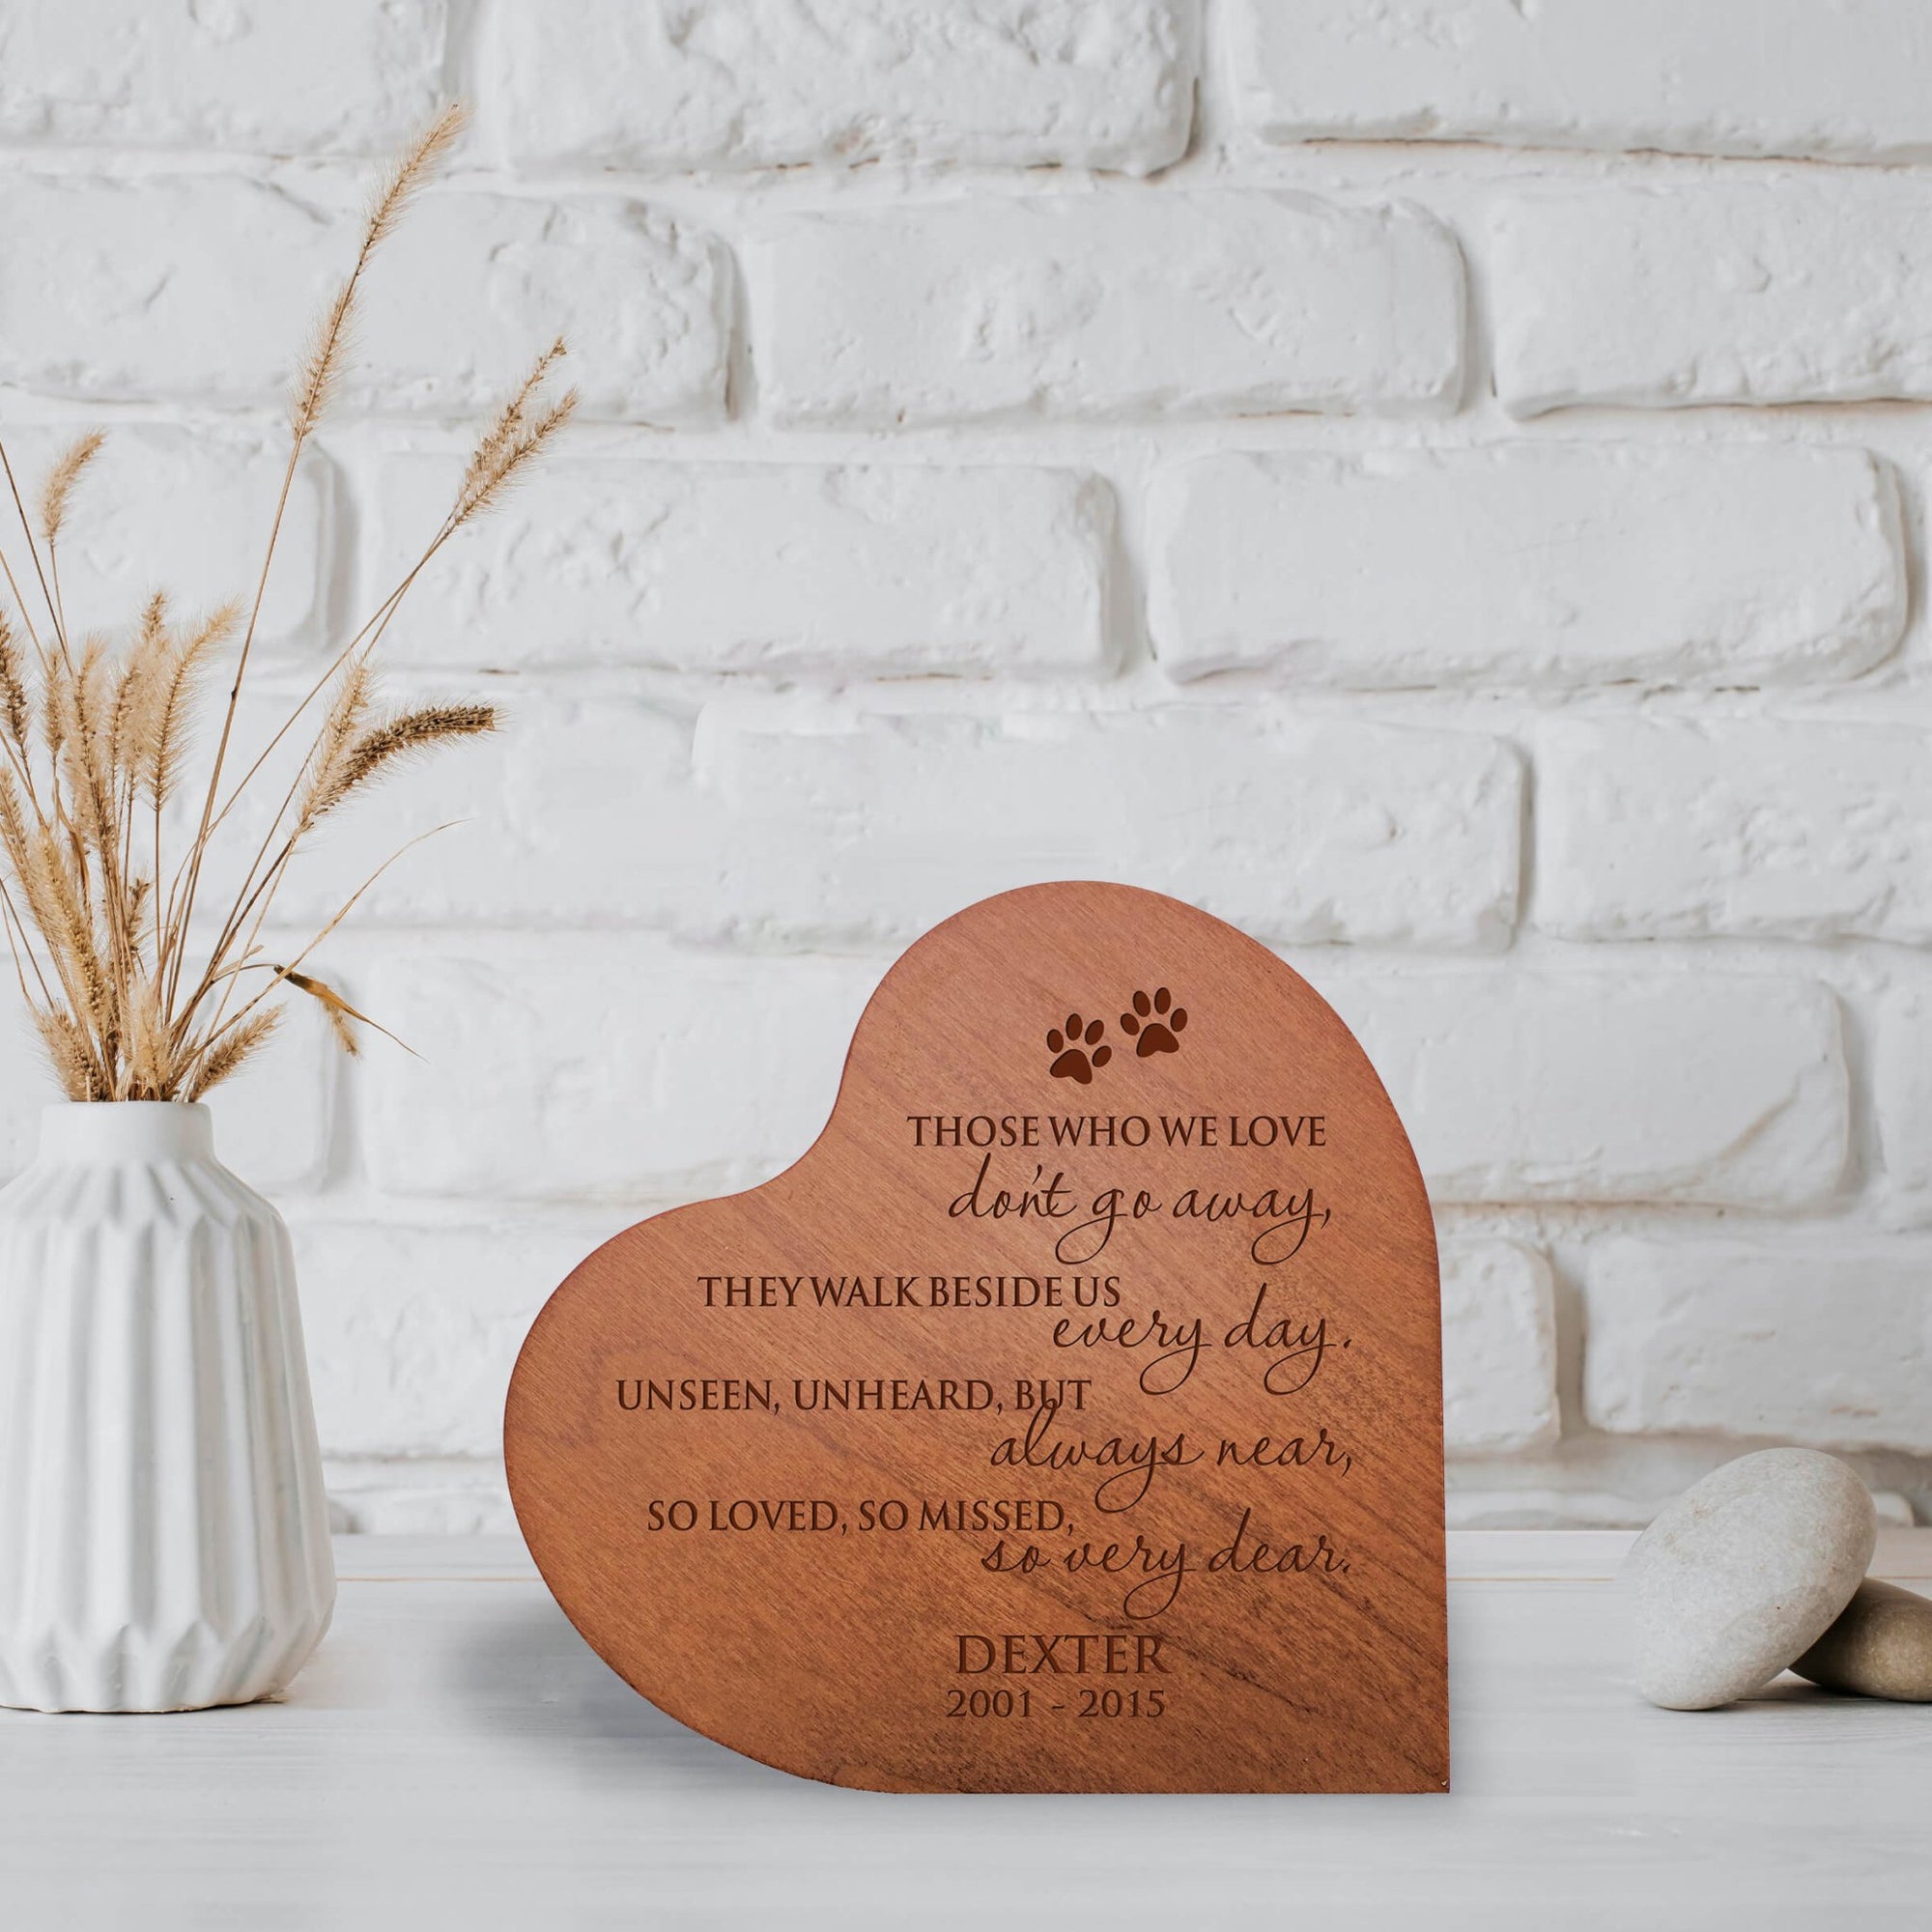 Personalized Small Heart Cremation Urn Keepsake For Pet Ashes - Those Who We Love Don't Go Away - LifeSong Milestones